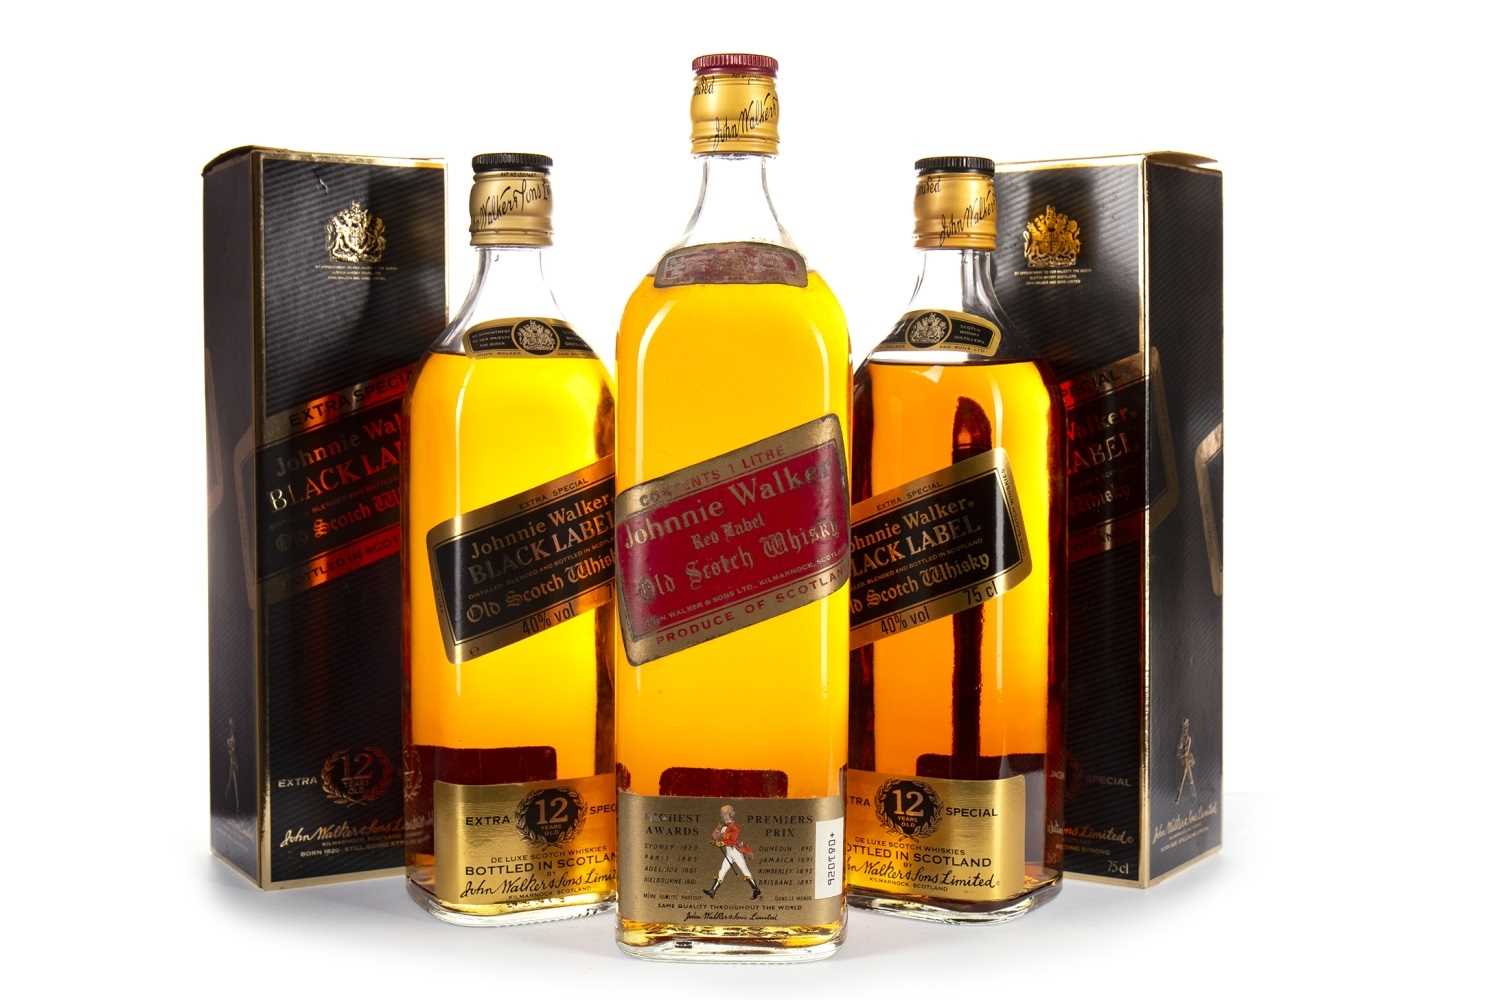 Lot 440 - TWO BOTTLES OF JOHNNIE WALKER BLACK LABEL, AND ONE LITRE OF JOHNNIE WALKER RED